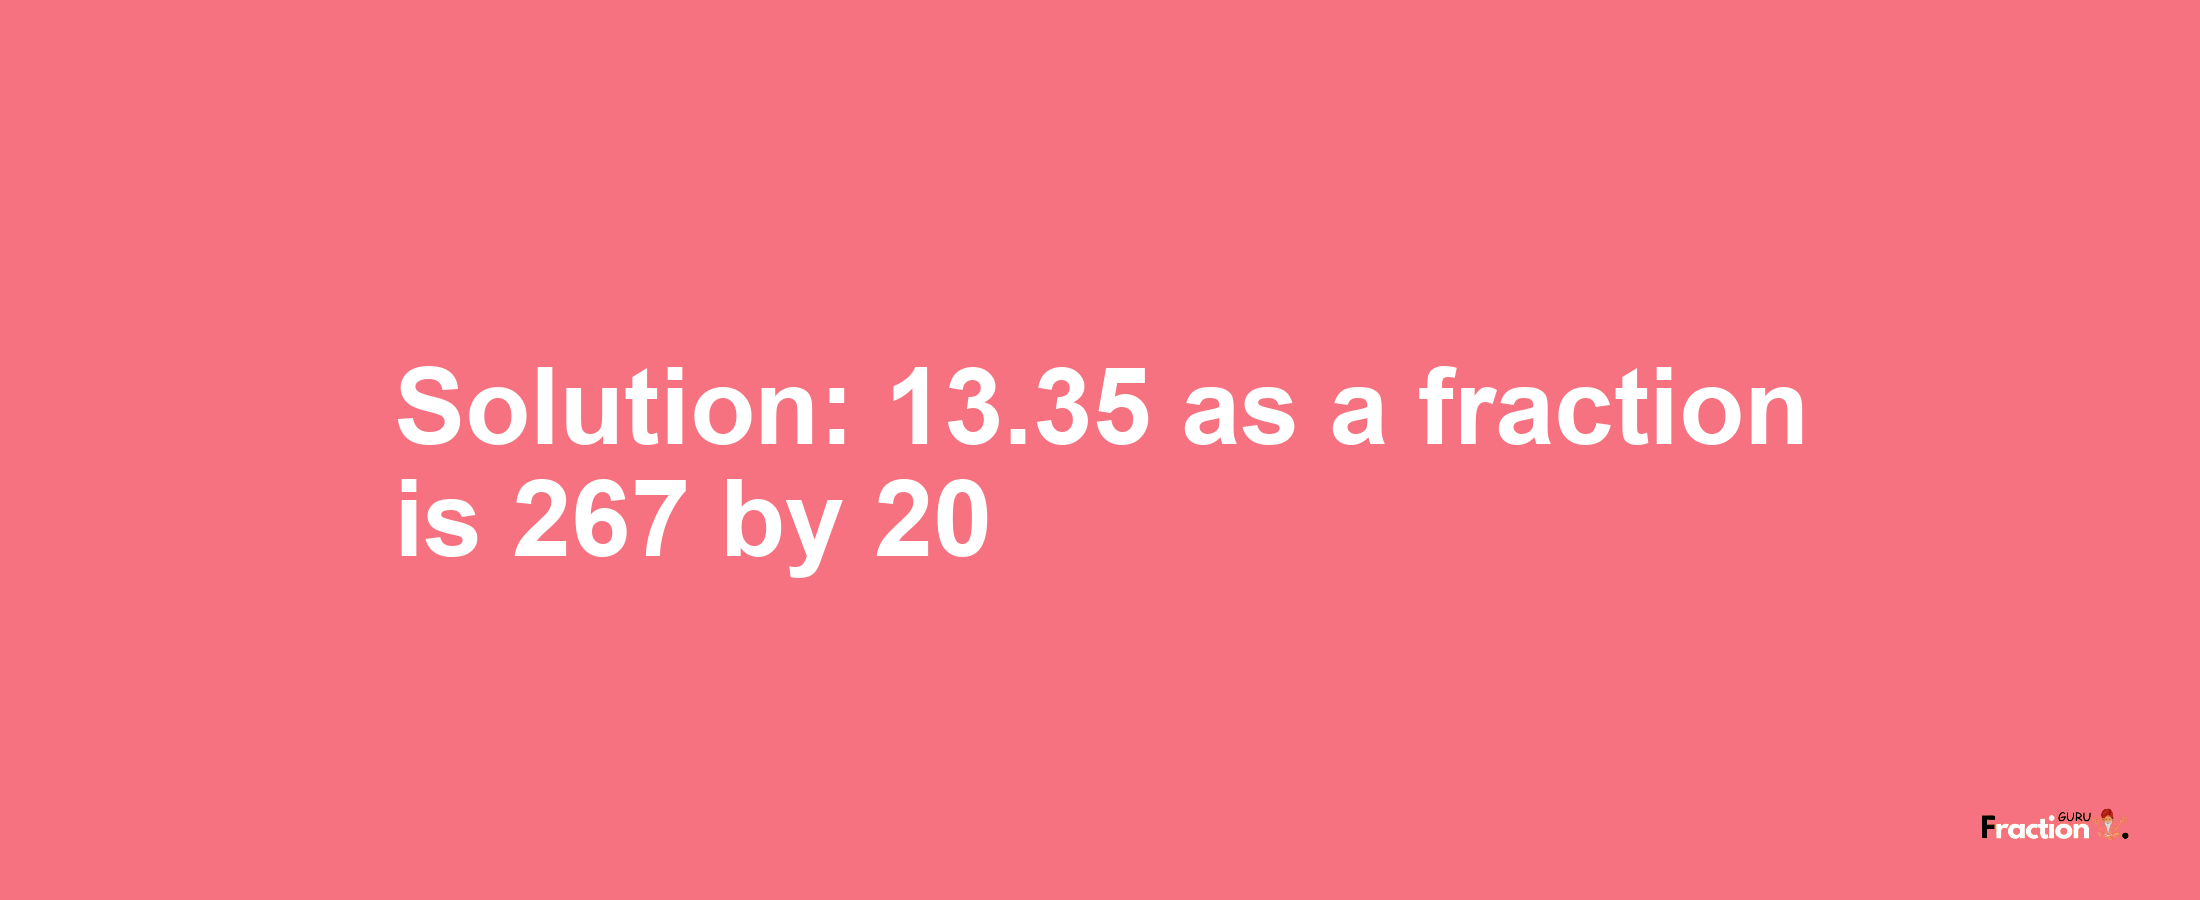 Solution:13.35 as a fraction is 267/20